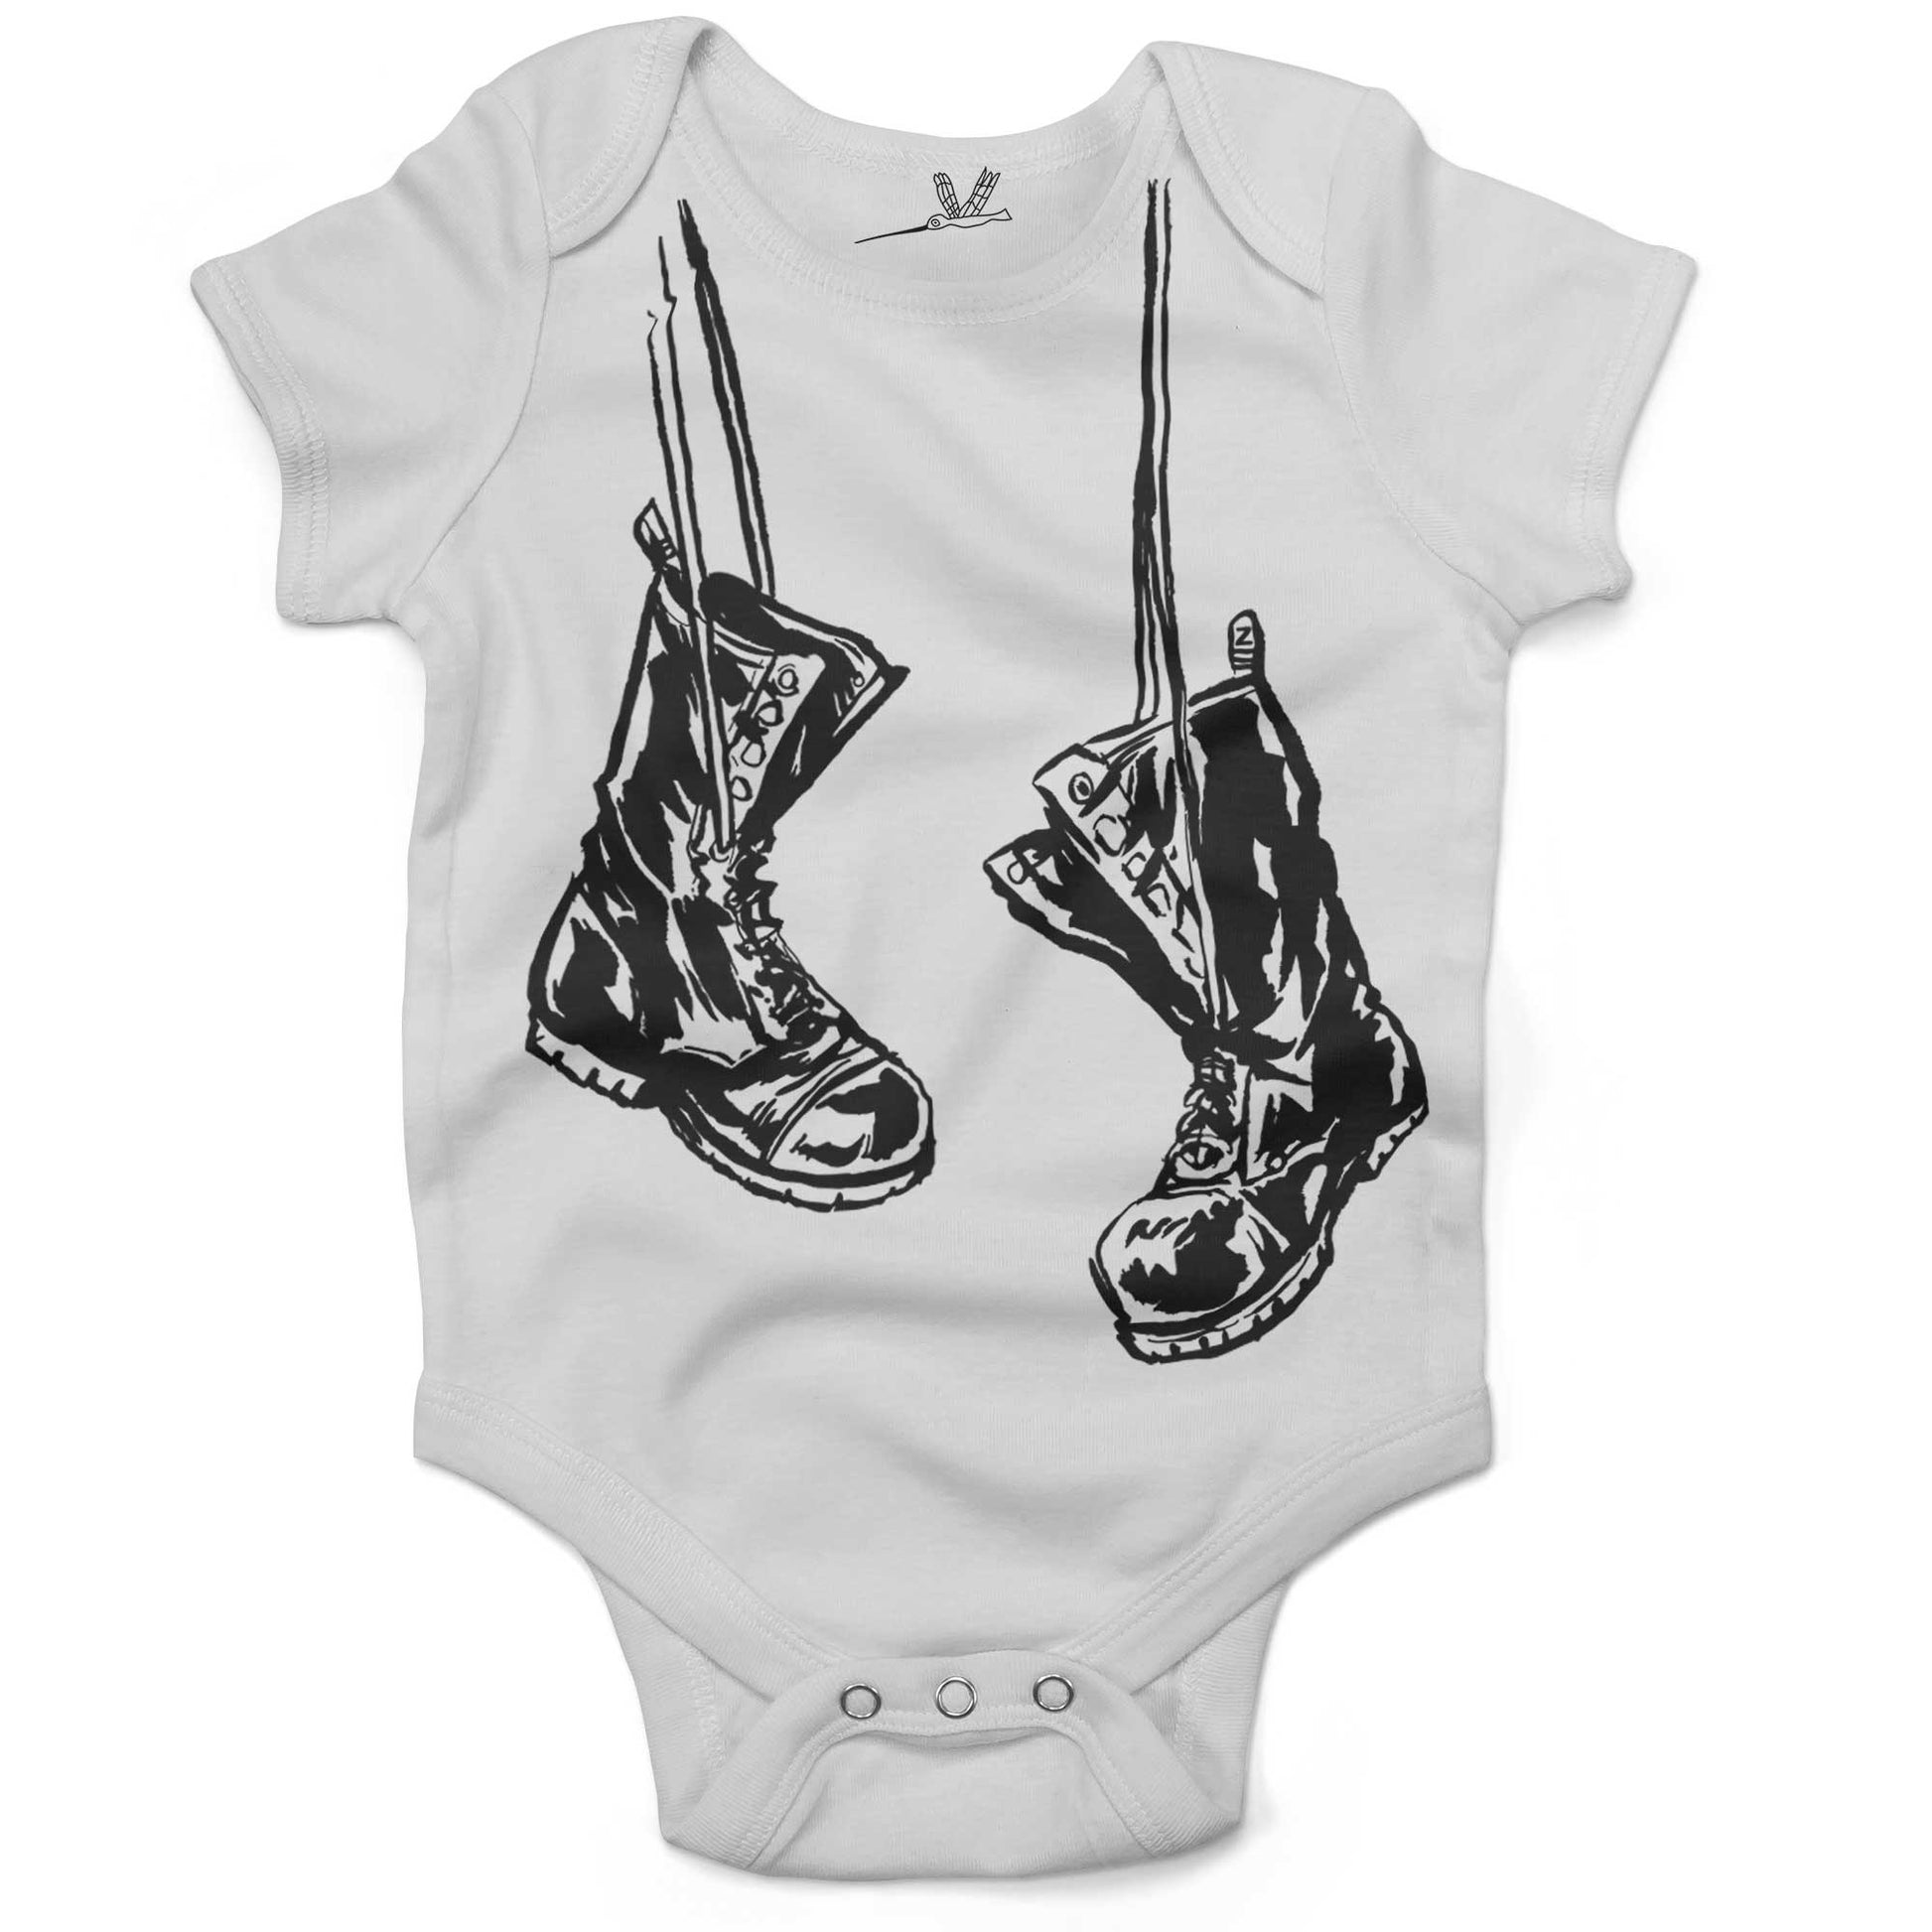 Baby Combat Boots Infant Bodysuit or Raglan Tee-White-3-6 months